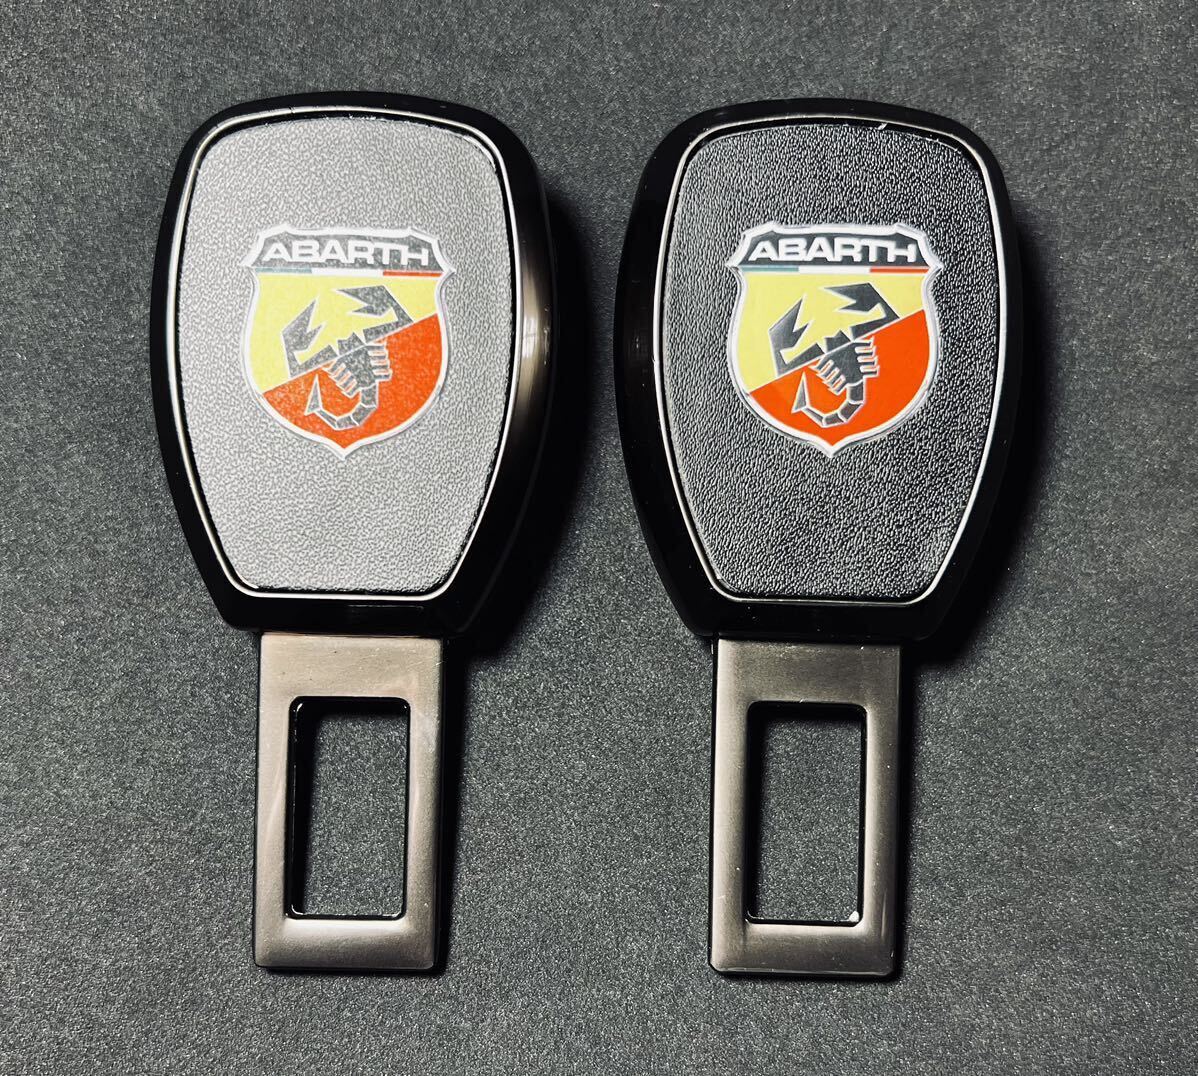 * ABARTH abarth Logo Mark metal seat belt extension buckle extension buckle 2 piece set bronze color *